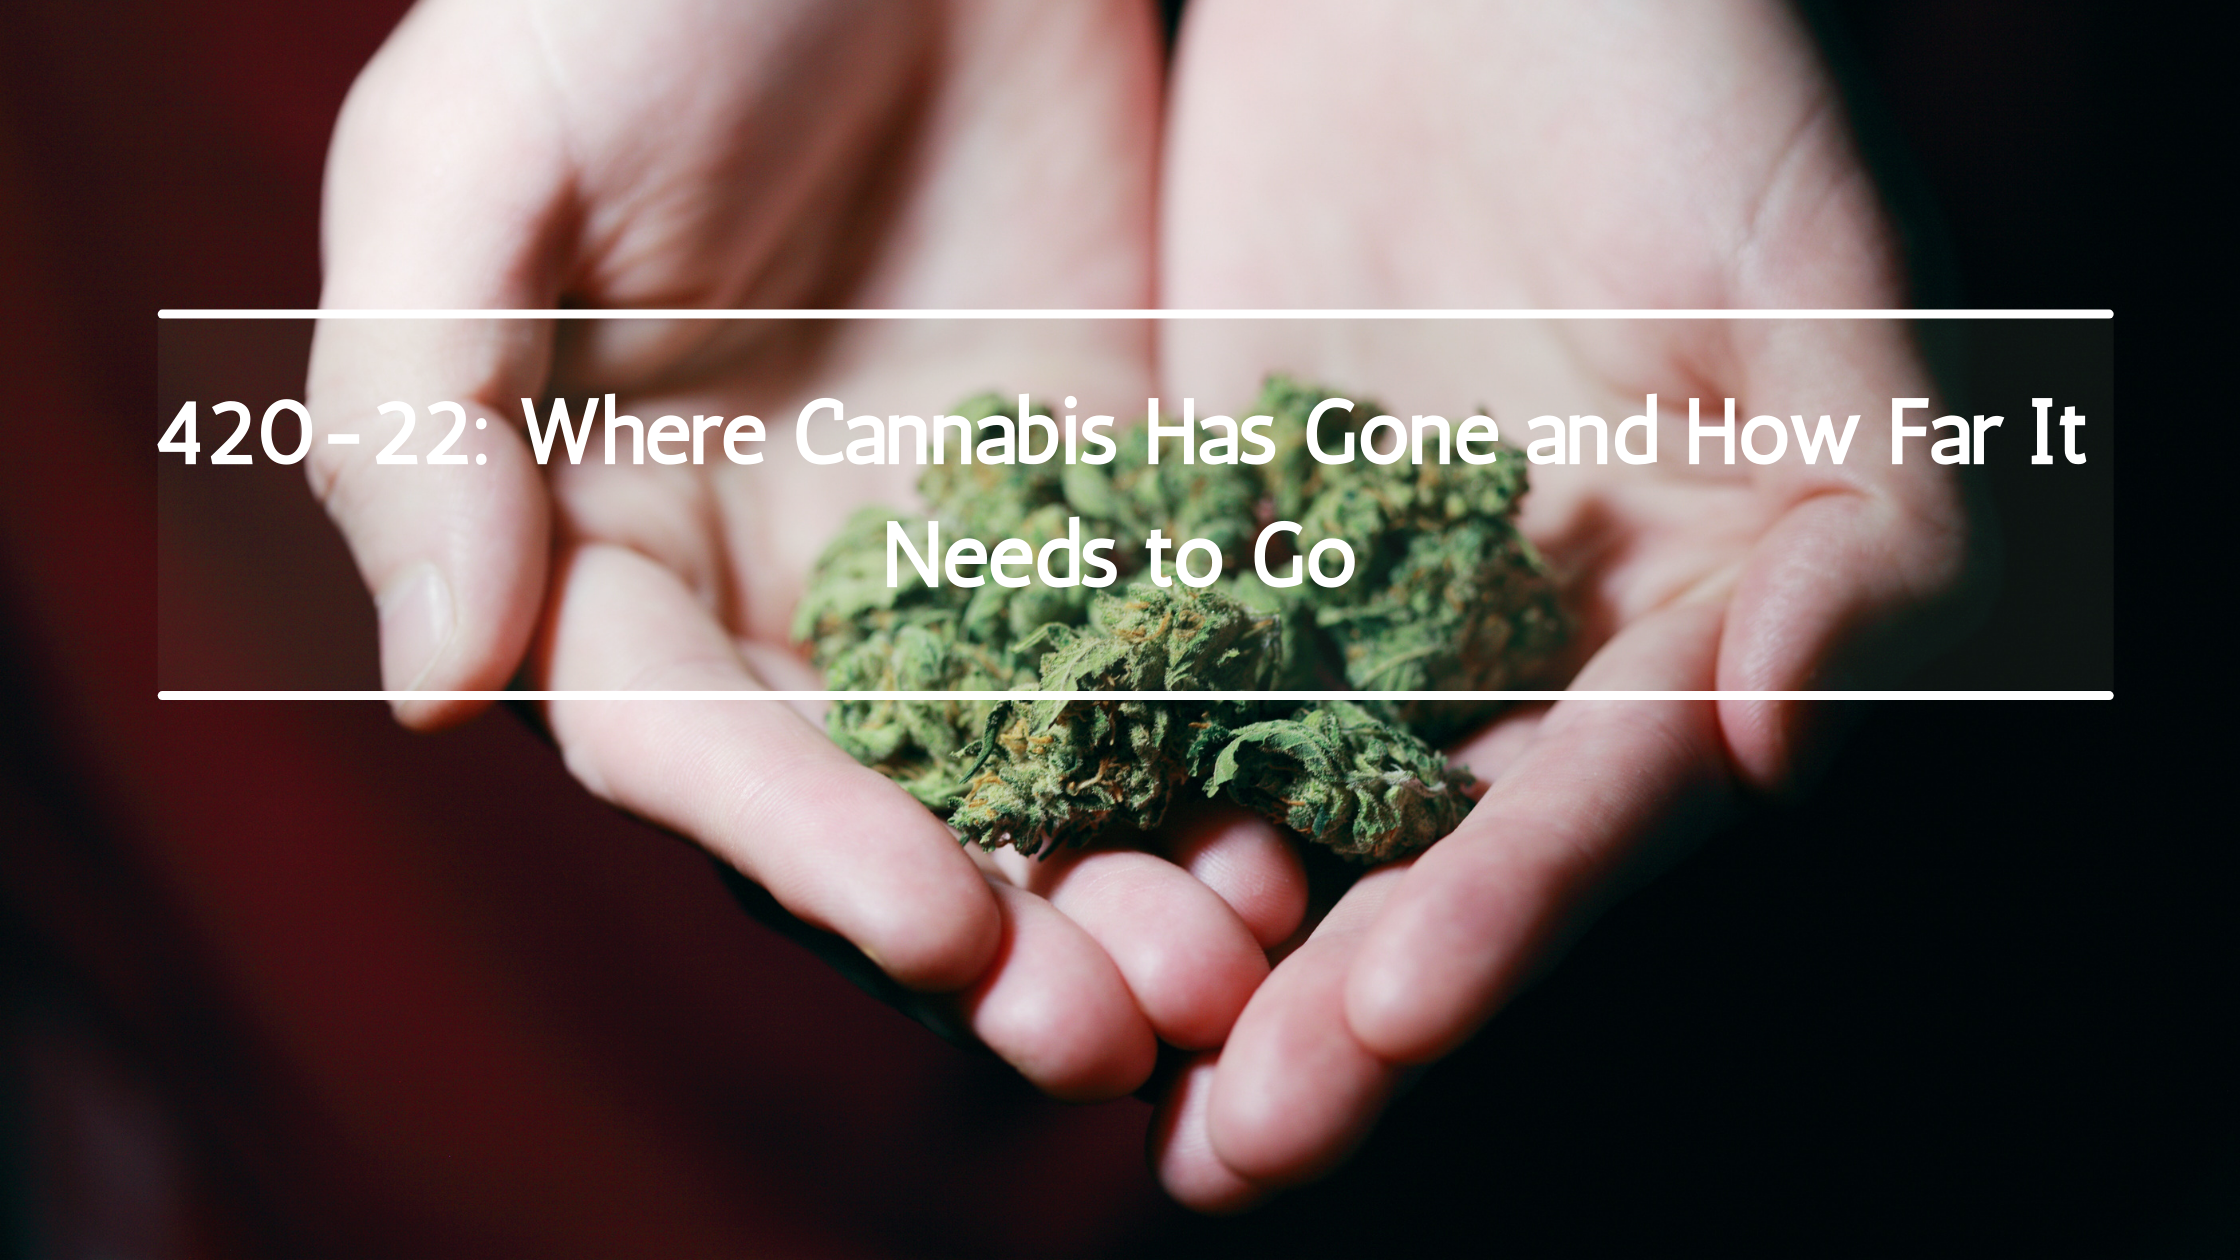 420: Where Cannabis Has Gone and How Far It Needs to Go